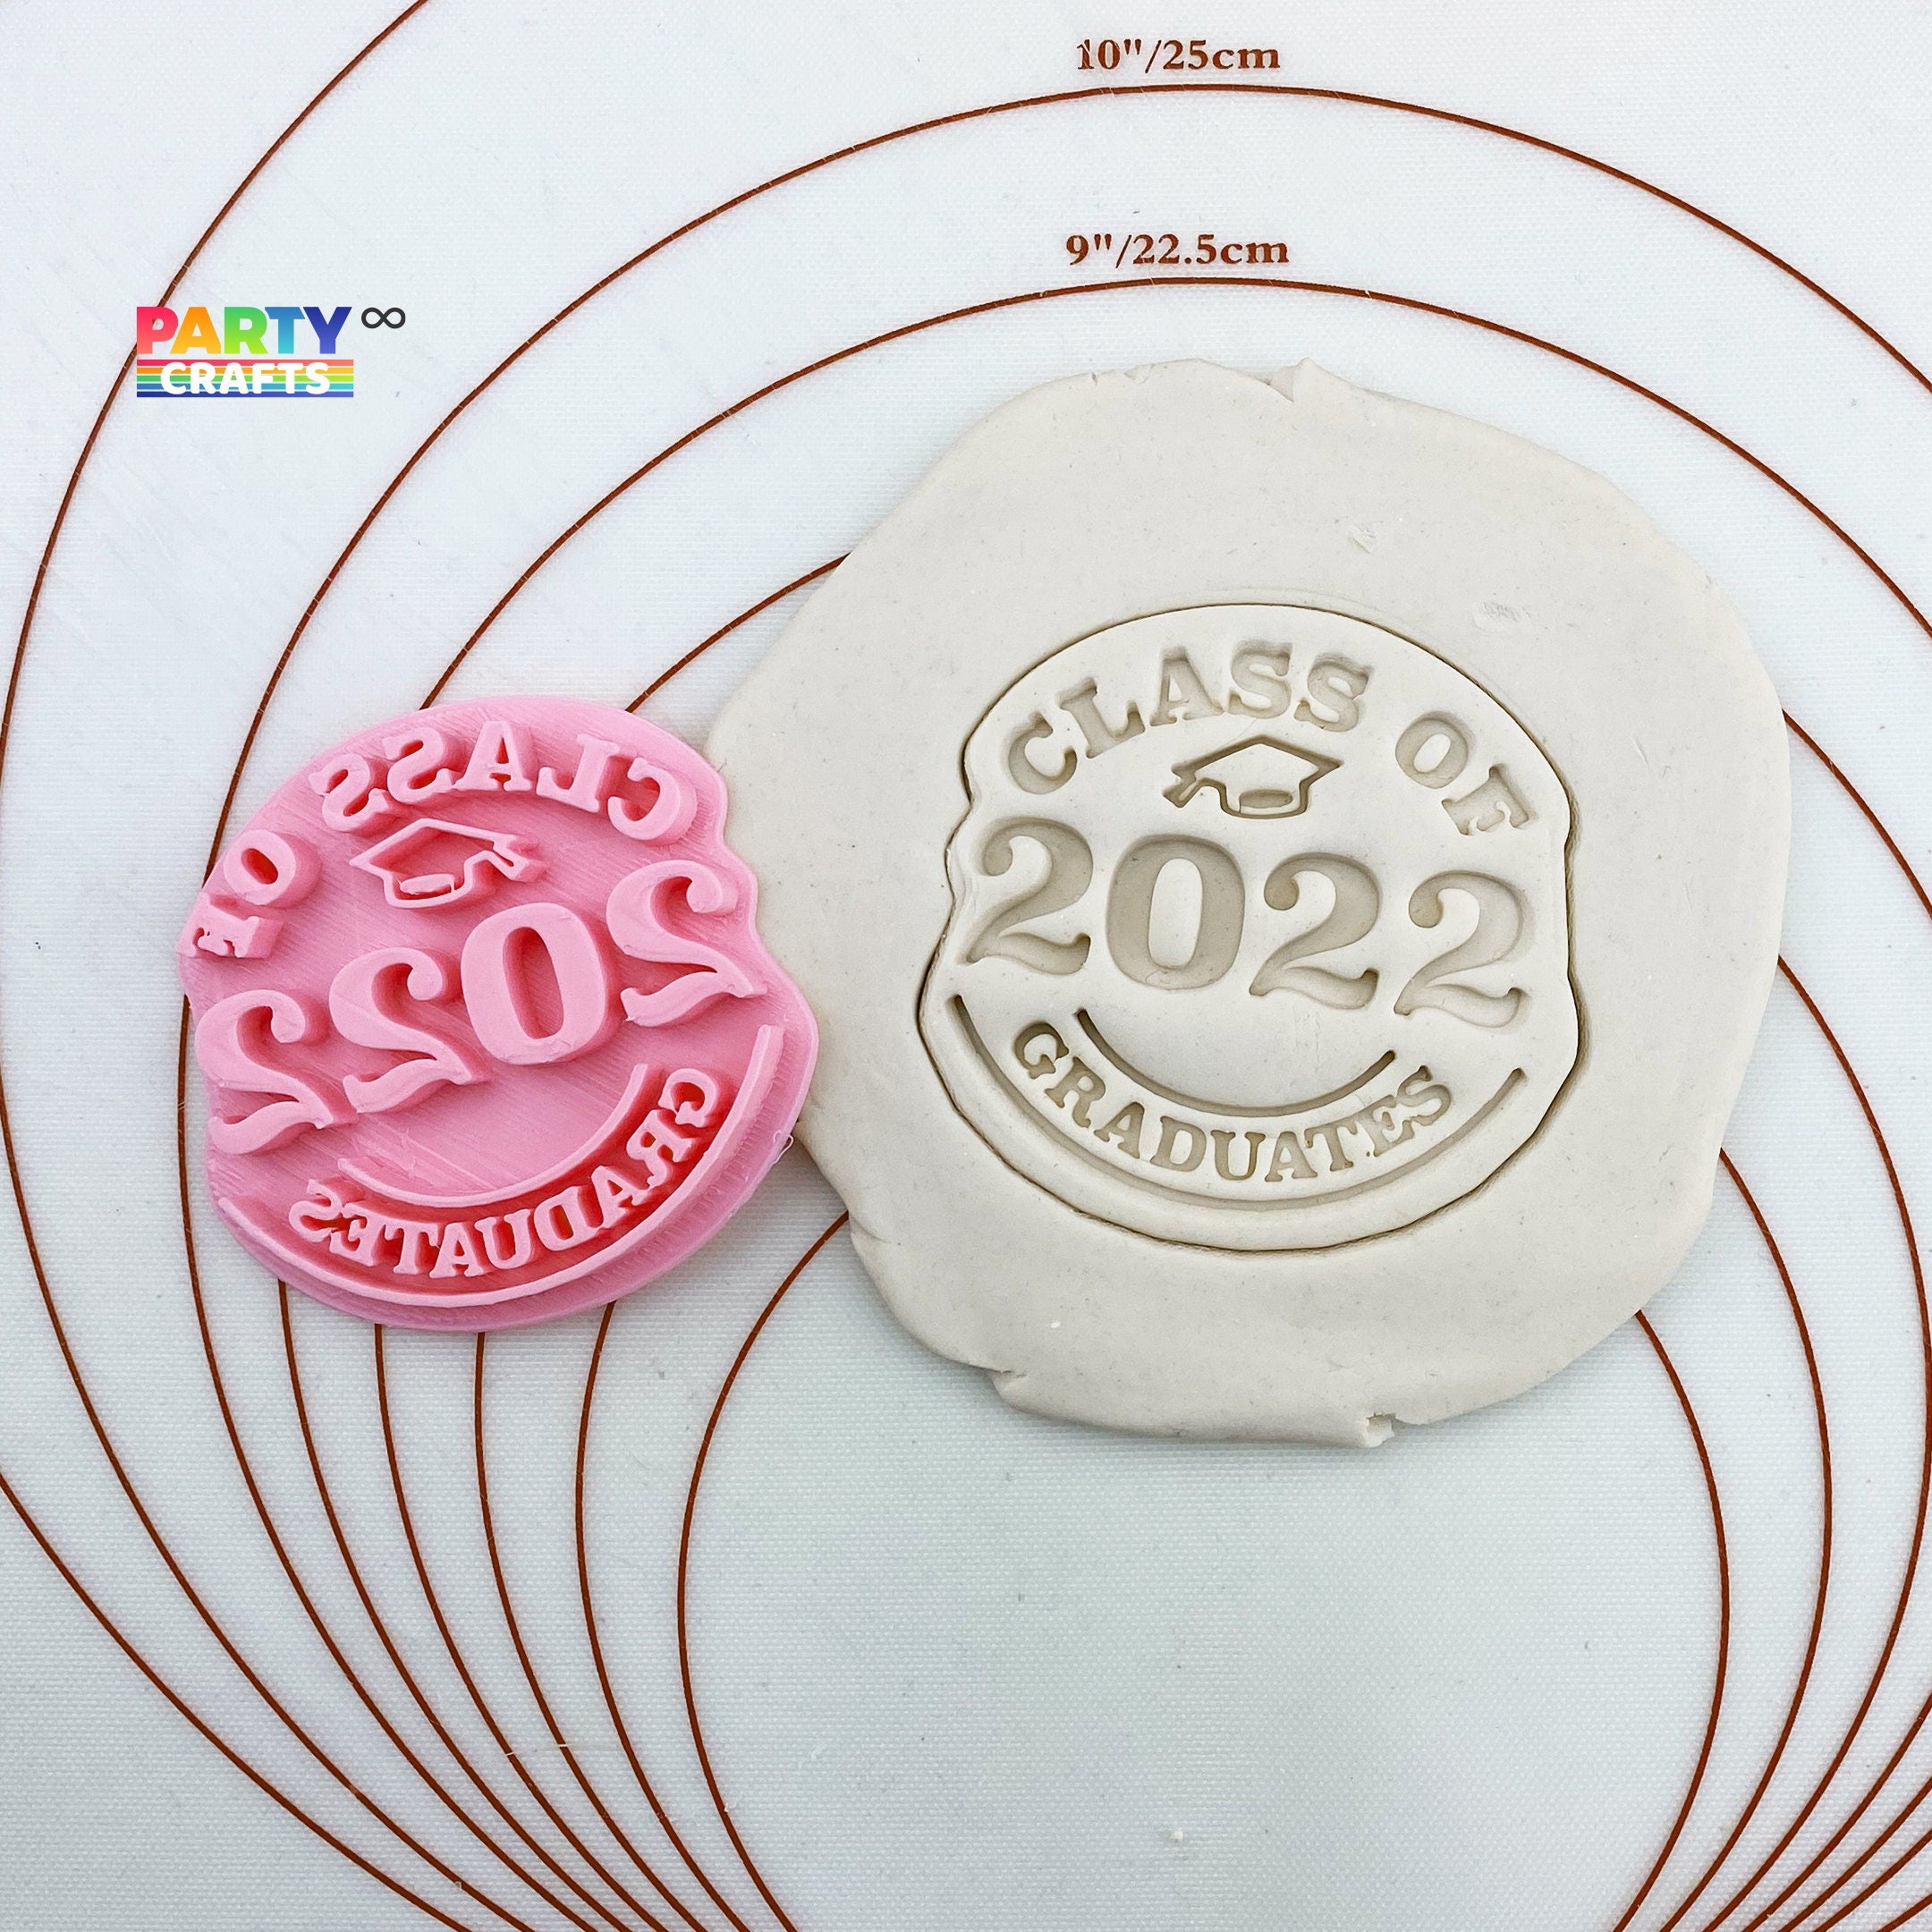 Class of 2022 Graduates Cookie Cutter and stamp